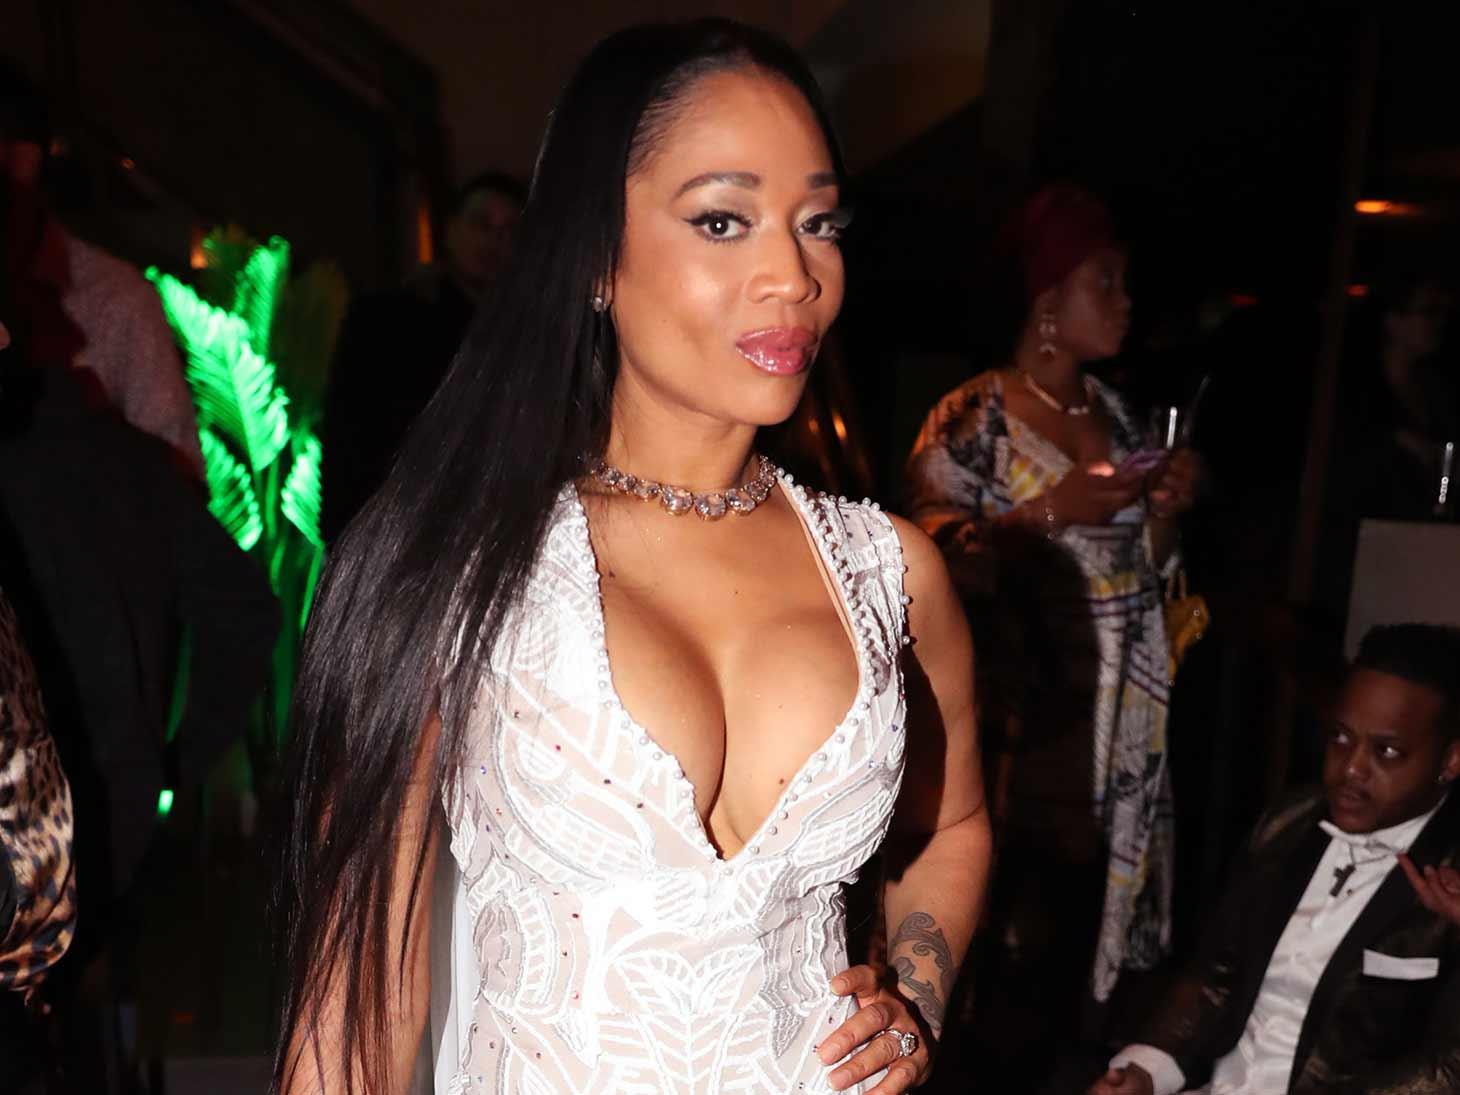 ‘Love & Hip Hop’ Star Mimi Faust Facing Serious Financial Problems, Hit with $156,000 Tax Lien